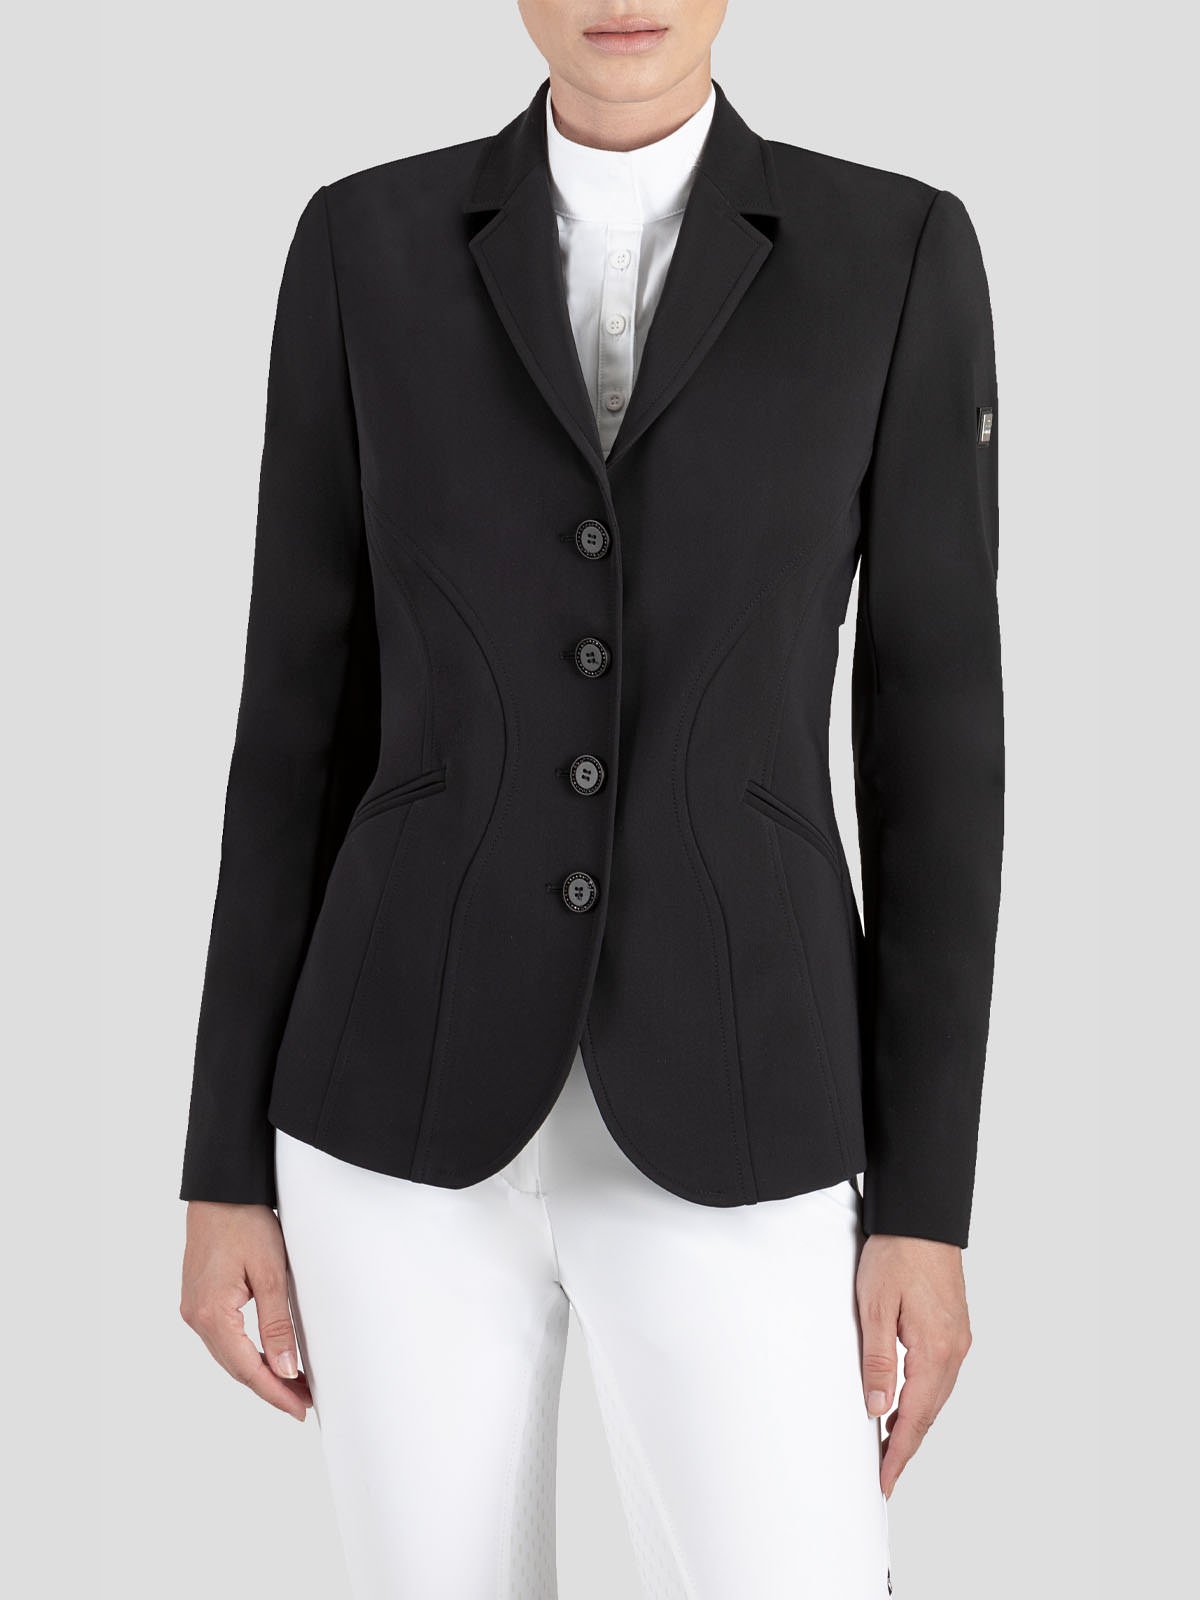 GERBY B-MOVE LIGHT WOMEN'S COMPETION JACKET - Black color - front view